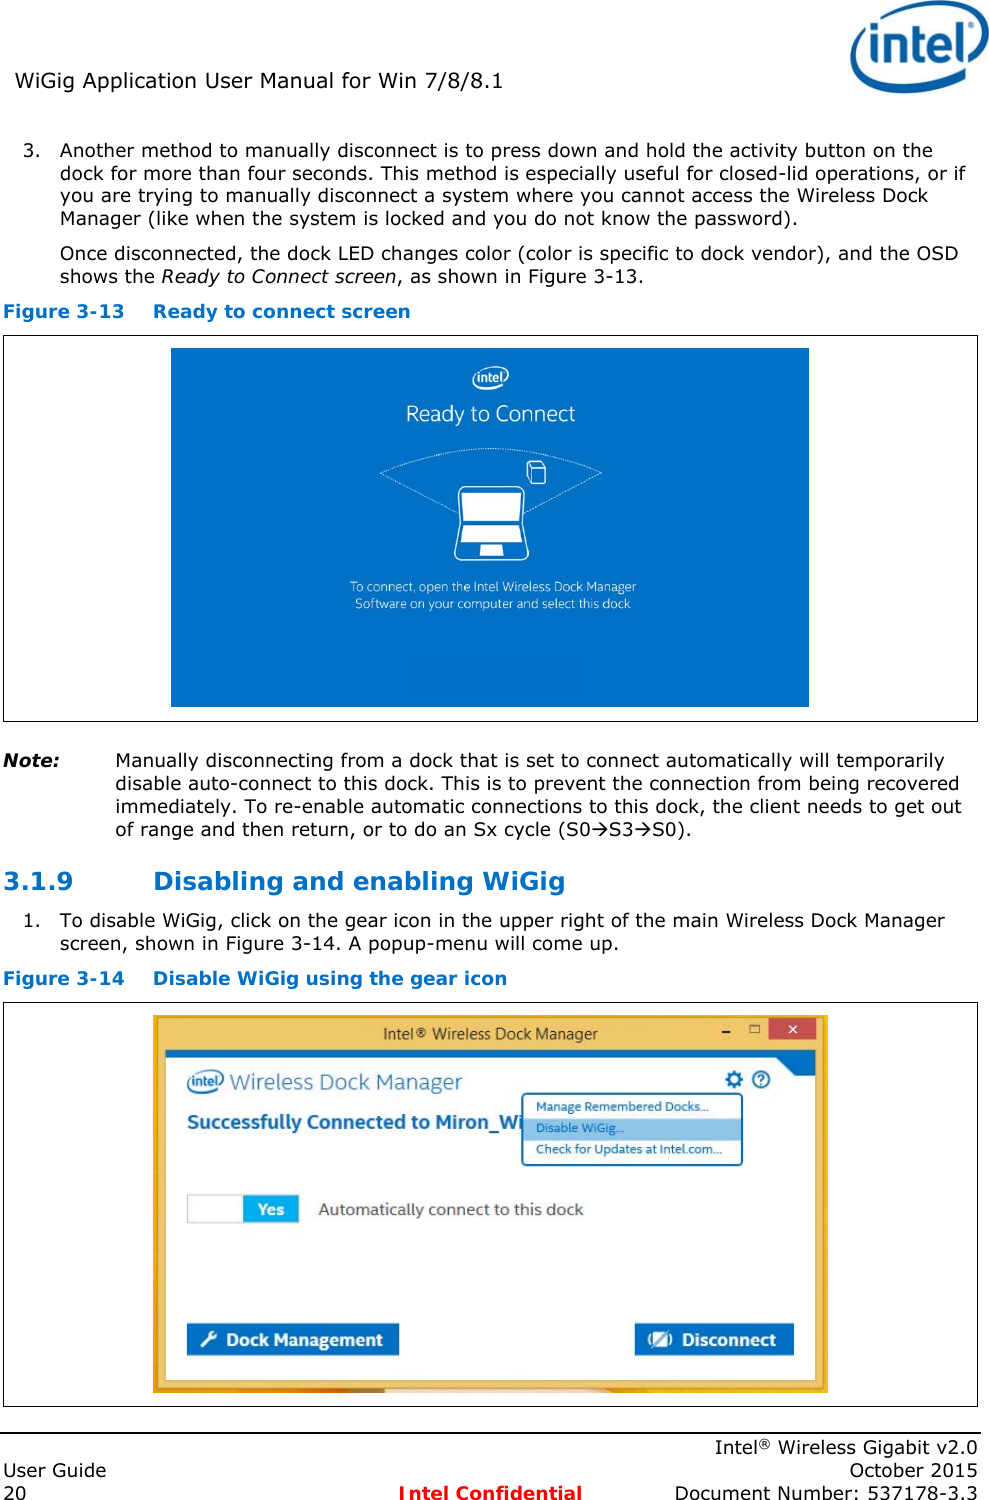 WiGig Application User Manual for Win 7/8/8.1      Intel® Wireless Gigabit v2.0 User Guide    October 2015 20 Intel Confidential  Document Number: 537178-3.3 3. Another method to manually disconnect is to press down and hold the activity button on the dock for more than four seconds. This method is especially useful for closed-lid operations, or if you are trying to manually disconnect a system where you cannot access the Wireless Dock Manager (like when the system is locked and you do not know the password). Once disconnected, the dock LED changes color (color is specific to dock vendor), and the OSD shows the Ready to Connect screen, as shown in Figure 3-13. Figure 3-13  Ready to connect screen  Note: Manually disconnecting from a dock that is set to connect automatically will temporarily disable auto-connect to this dock. This is to prevent the connection from being recovered immediately. To re-enable automatic connections to this dock, the client needs to get out of range and then return, or to do an Sx cycle (S0S3S0). 3.1.9 Disabling and enabling WiGig 1. To disable WiGig, click on the gear icon in the upper right of the main Wireless Dock Manager screen, shown in Figure 3-14. A popup-menu will come up. Figure 3-14  Disable WiGig using the gear icon  